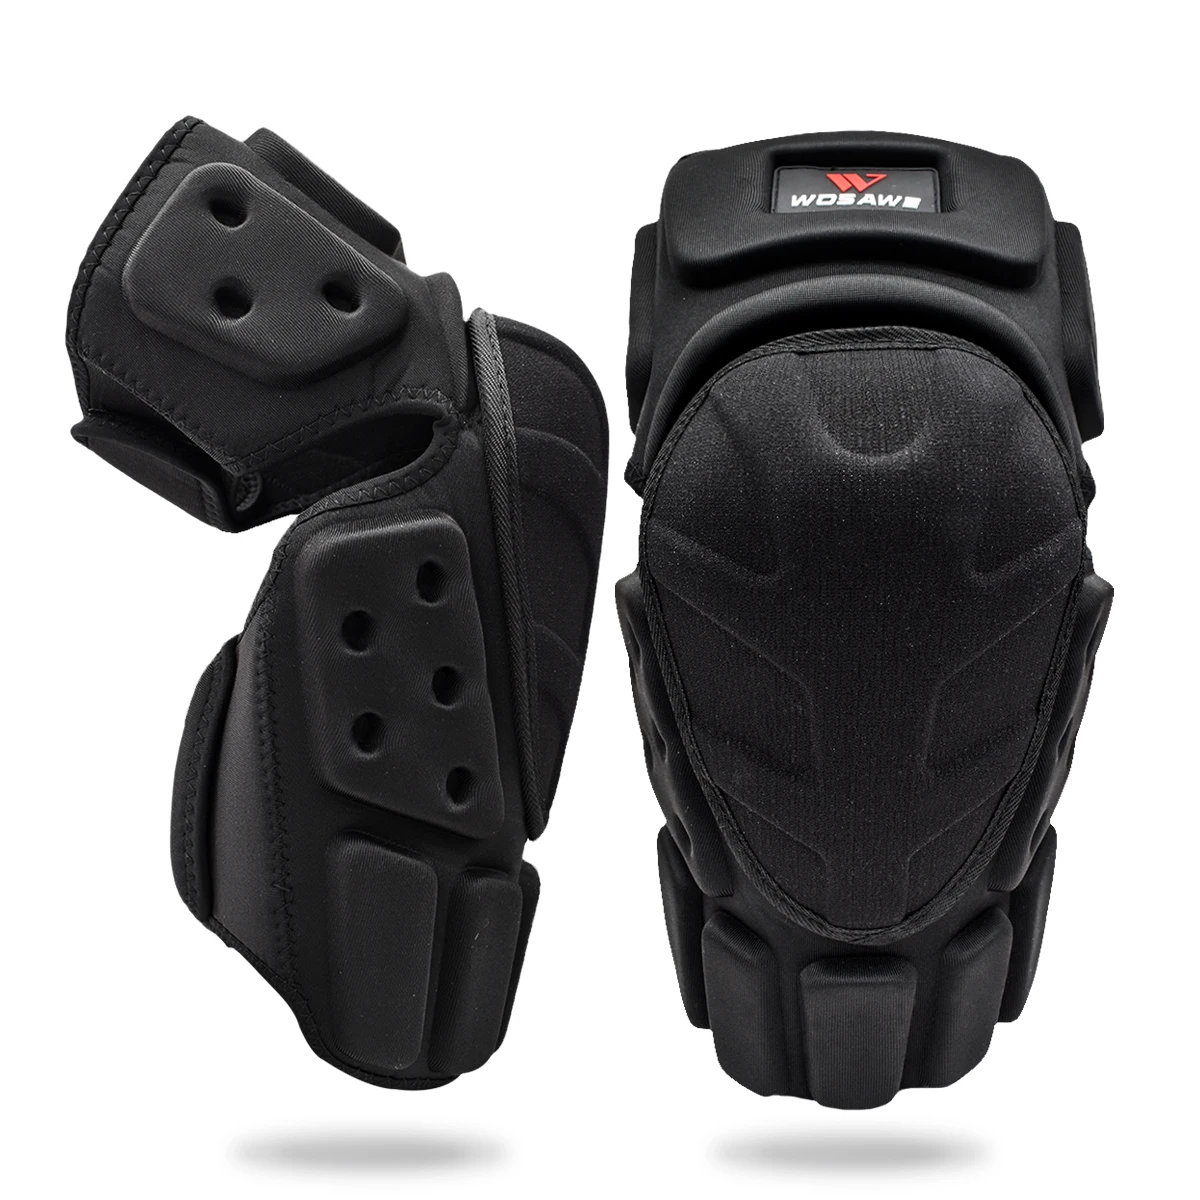 Motorcycle Knee Pads Protector Guard Motocross Protective Knee Shin Brace Adjustable Long Leg Sleeve Gear Support Protection for Motorcycle Biking Skate Skateboard Off Road Racing for Men Women Black